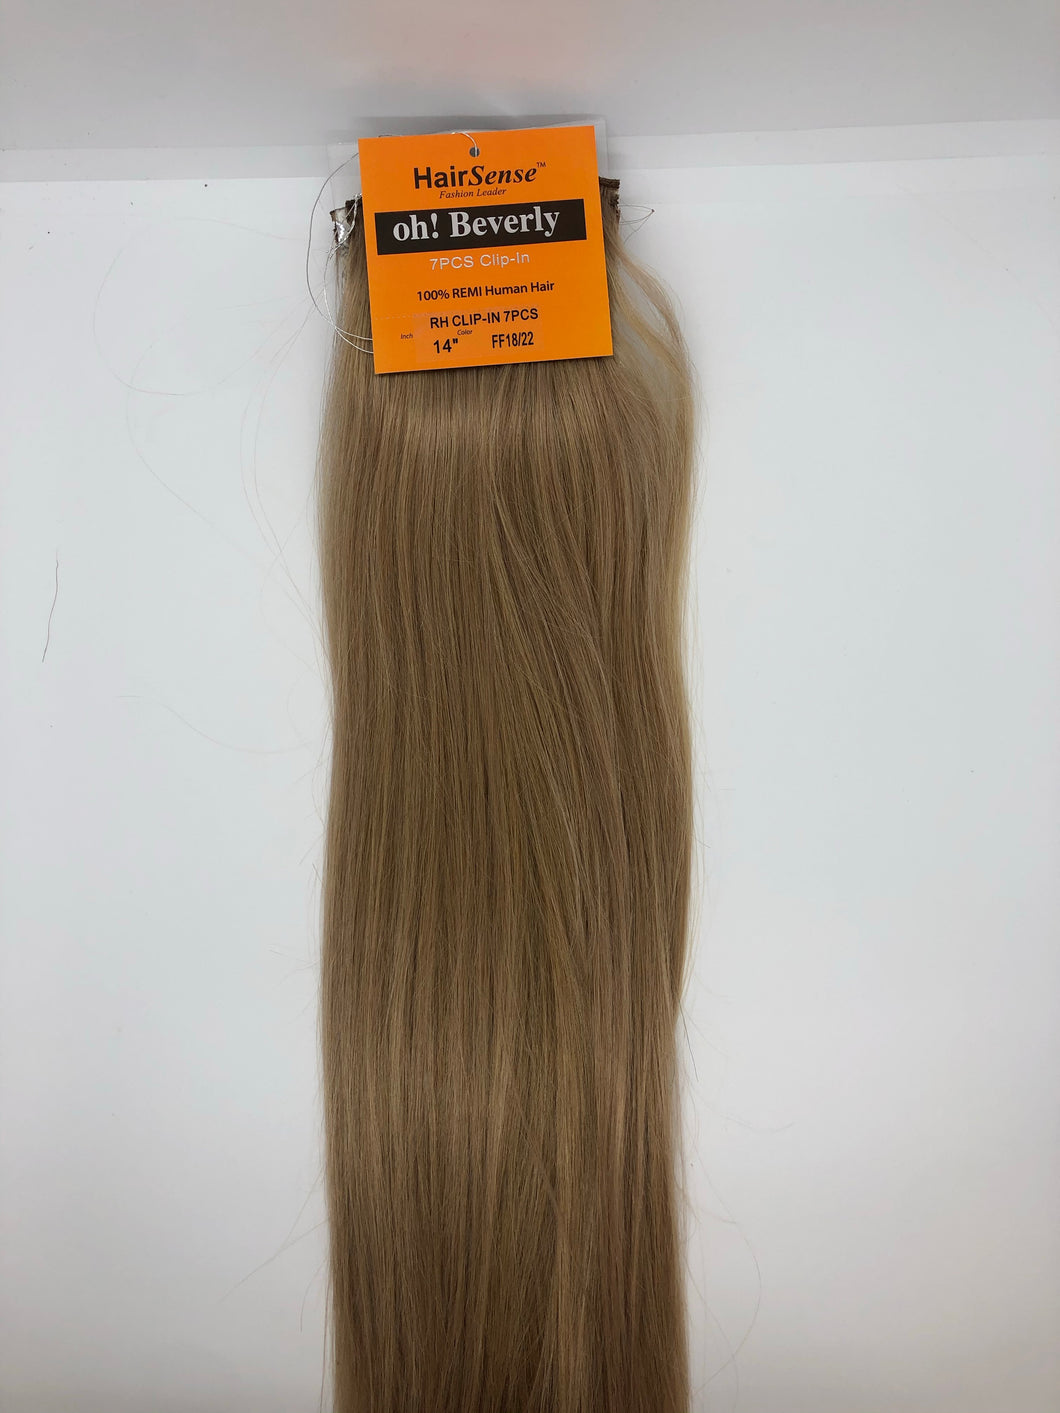 Hair Sense oh! Beverly 7 Piece Clip-In 100% REMI Human Hair Extension - Color: FF18/22